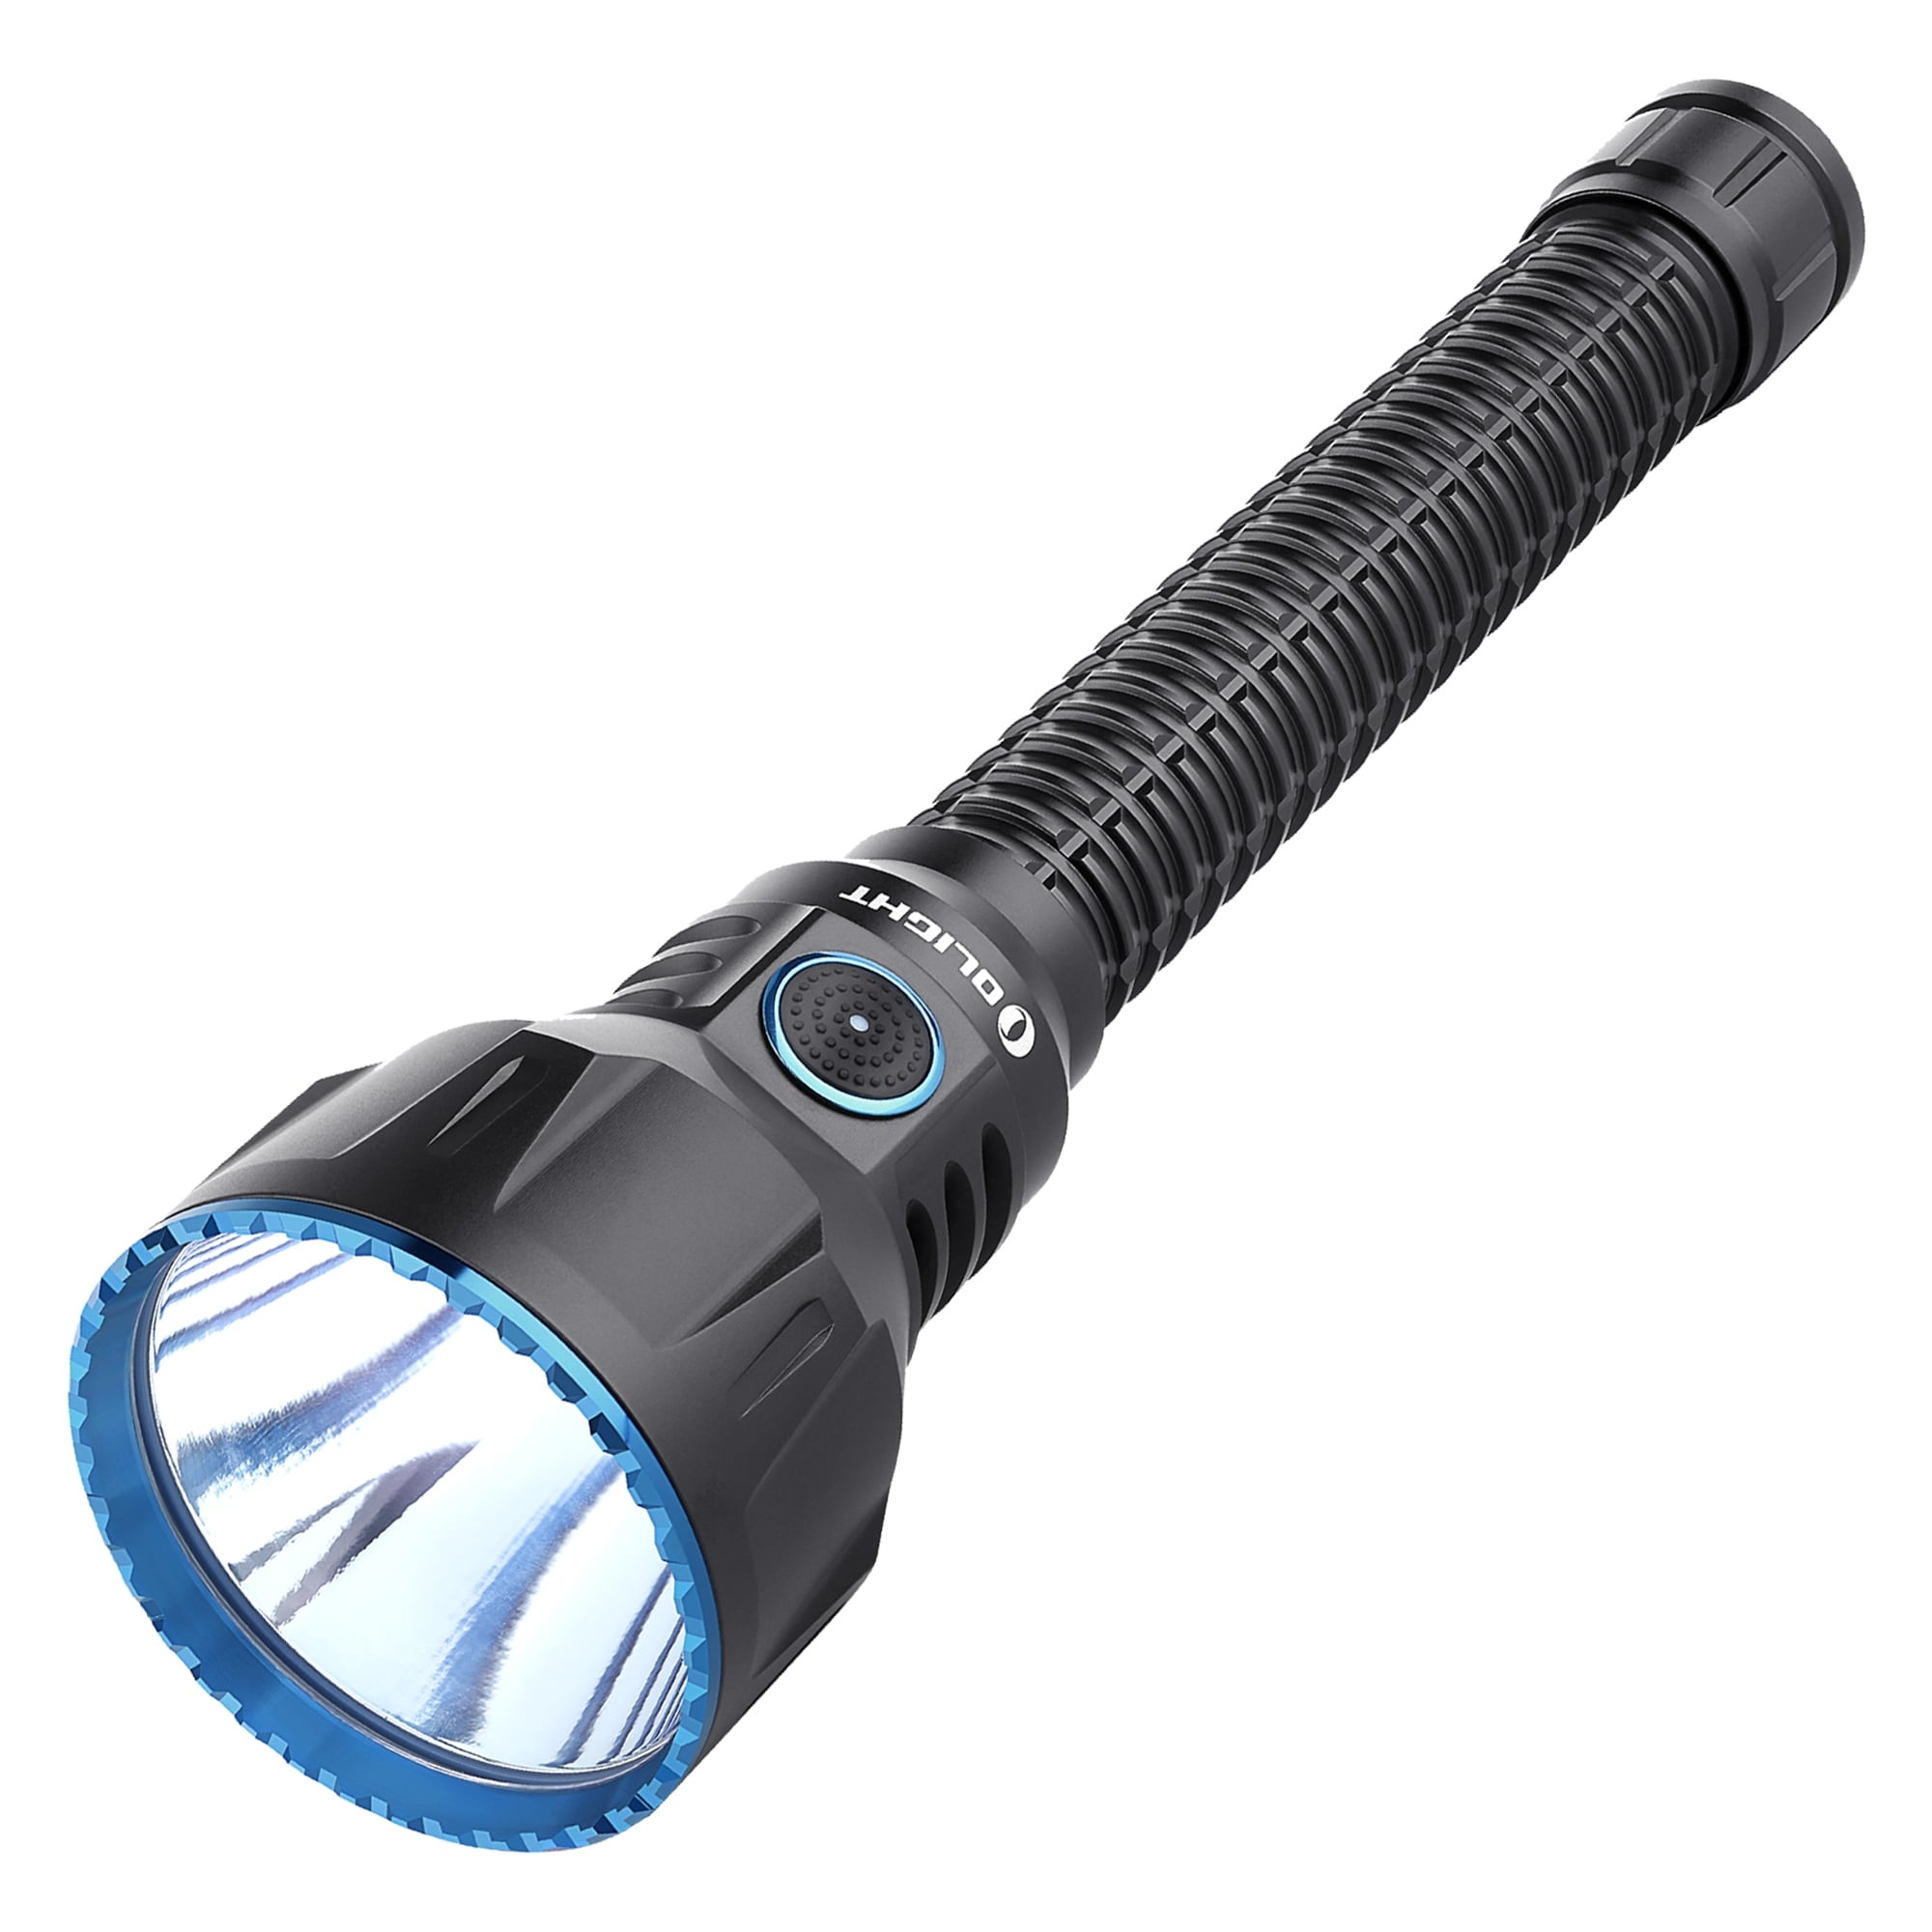 Olight WARRIOR X 2000 Lumen Tactical Flashlight with 2x Rechargeable Batteries 